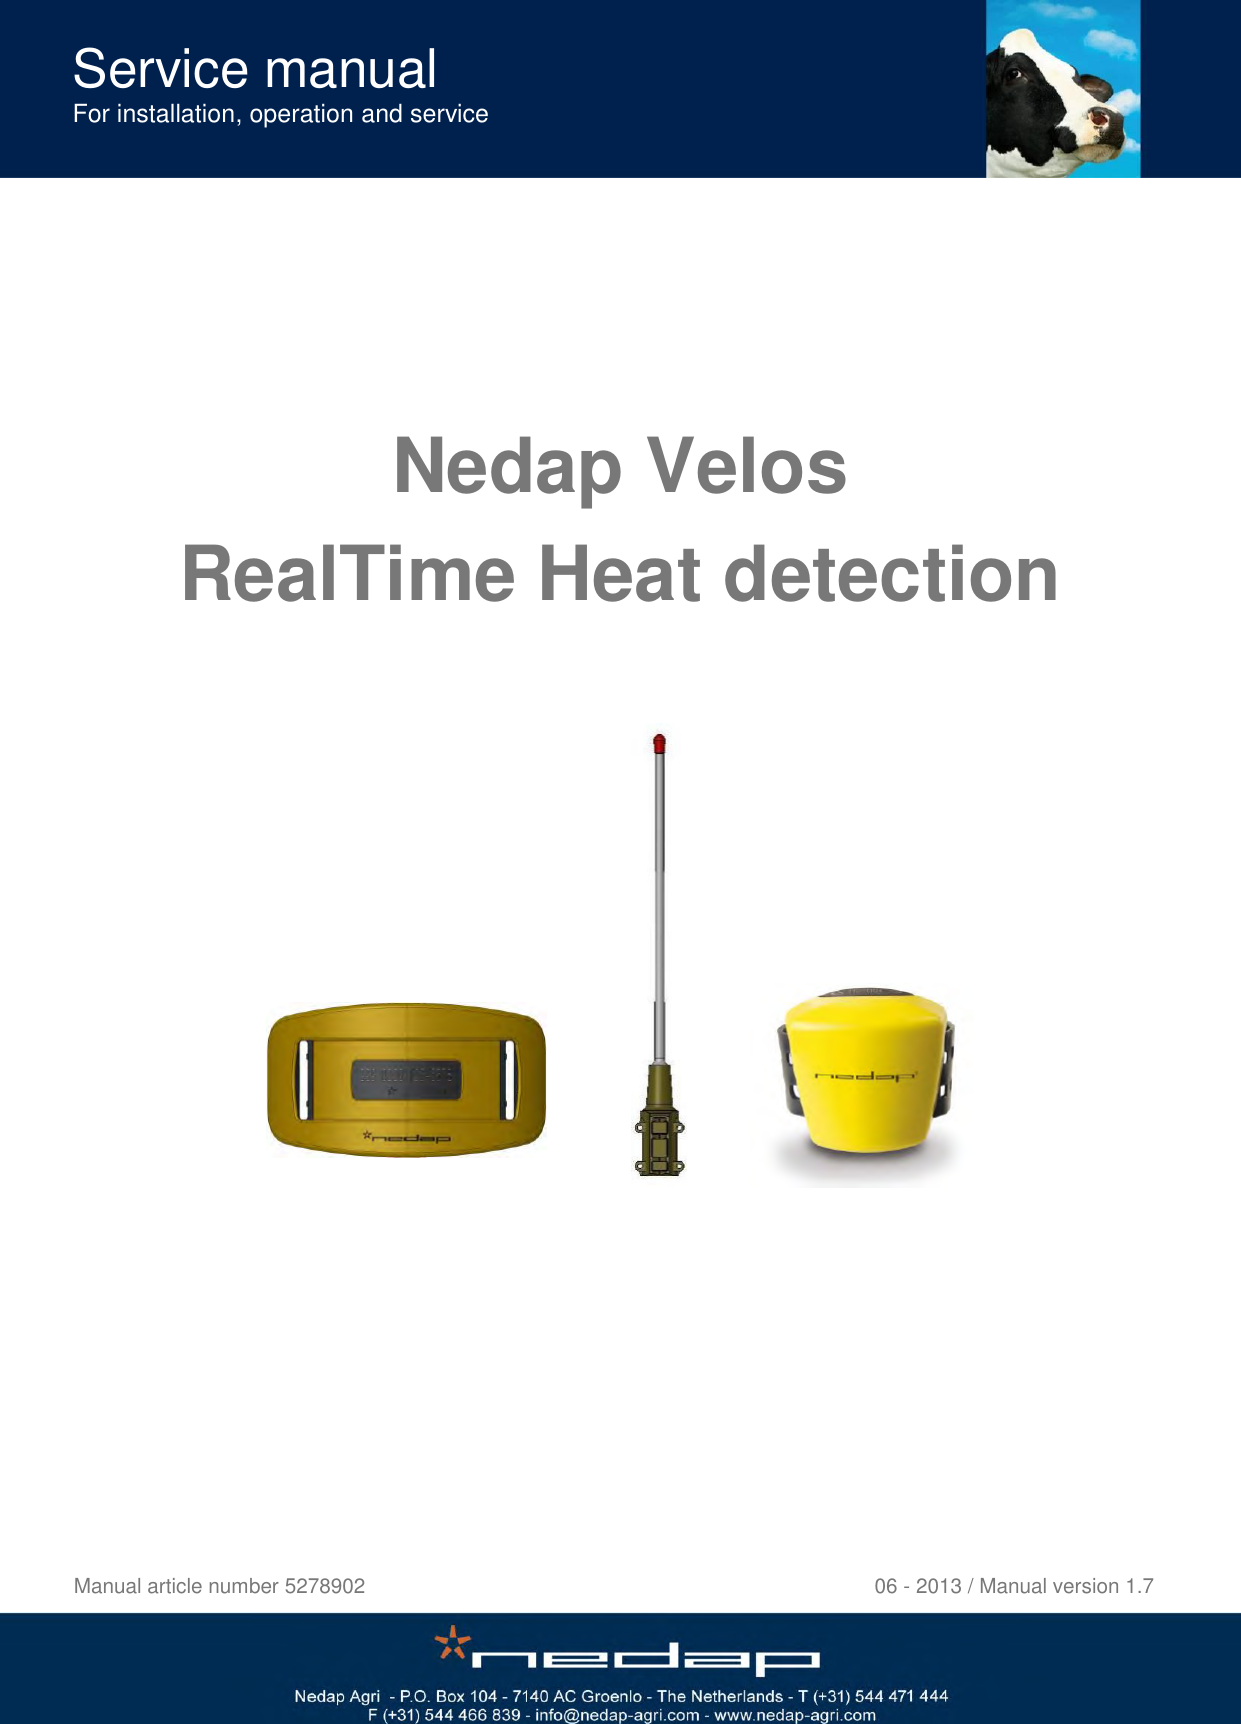            Nedap Velos RealTime Heat detection                     Manual article number 5278902                  06 - 2013 / Manual version 1.7Service manual For installation, operation and service 